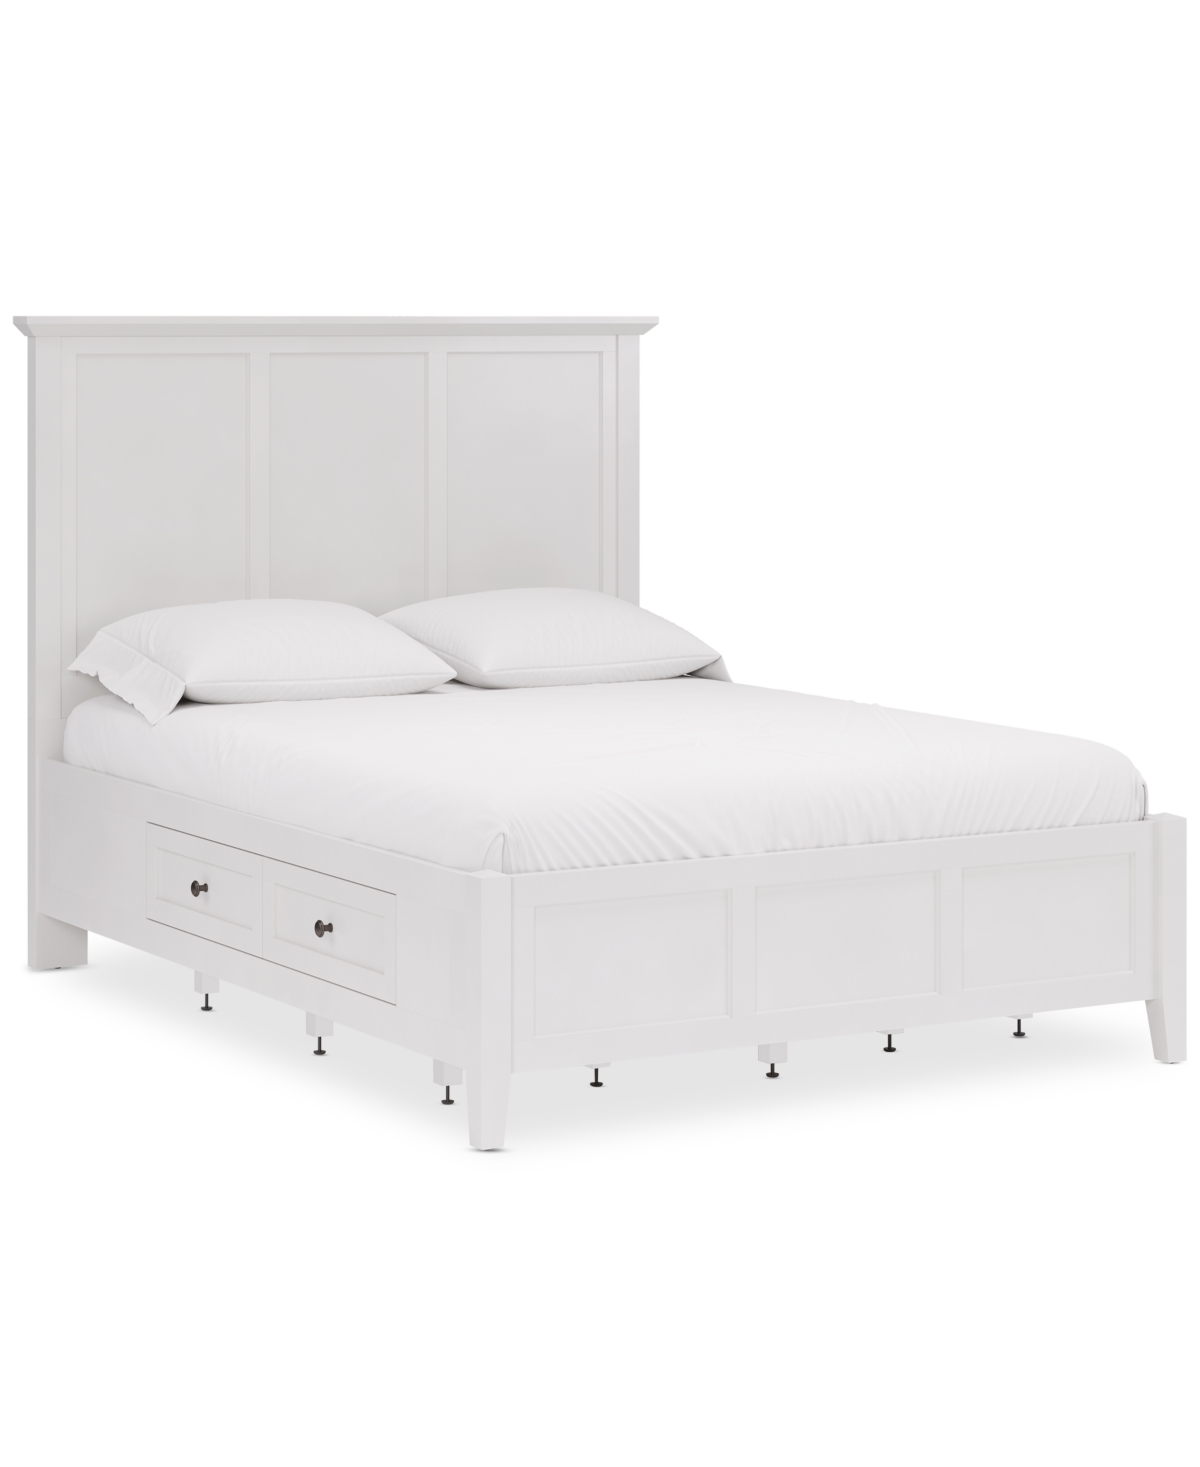 Macy's Hedworth Queen Storage Bed In White